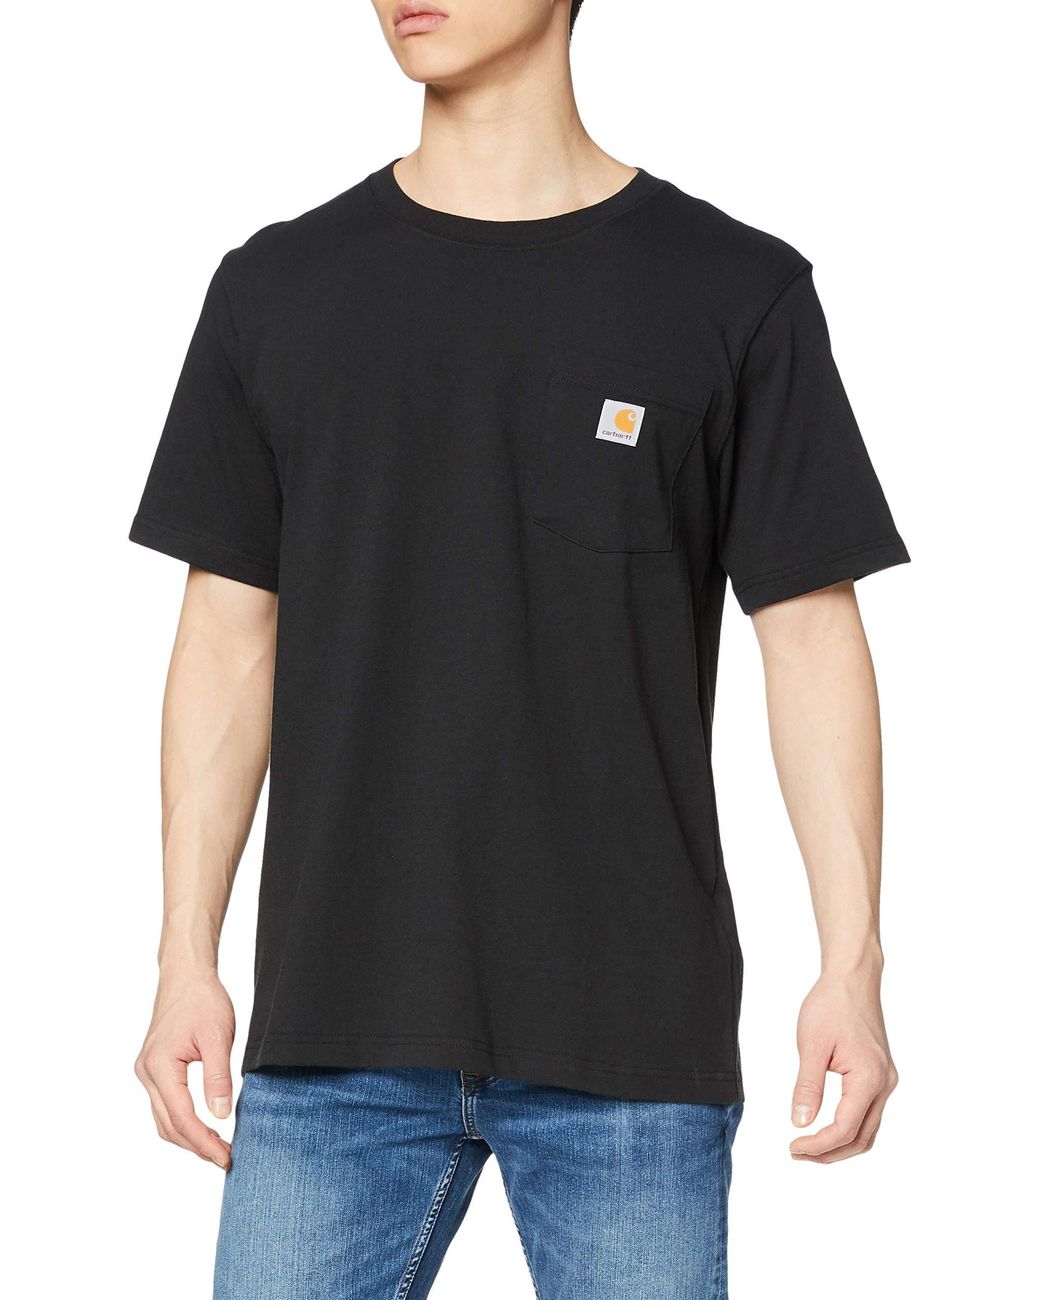 Carhartt Synthetic Size Relaxed Fit T-shirt in Black for Men - Lyst